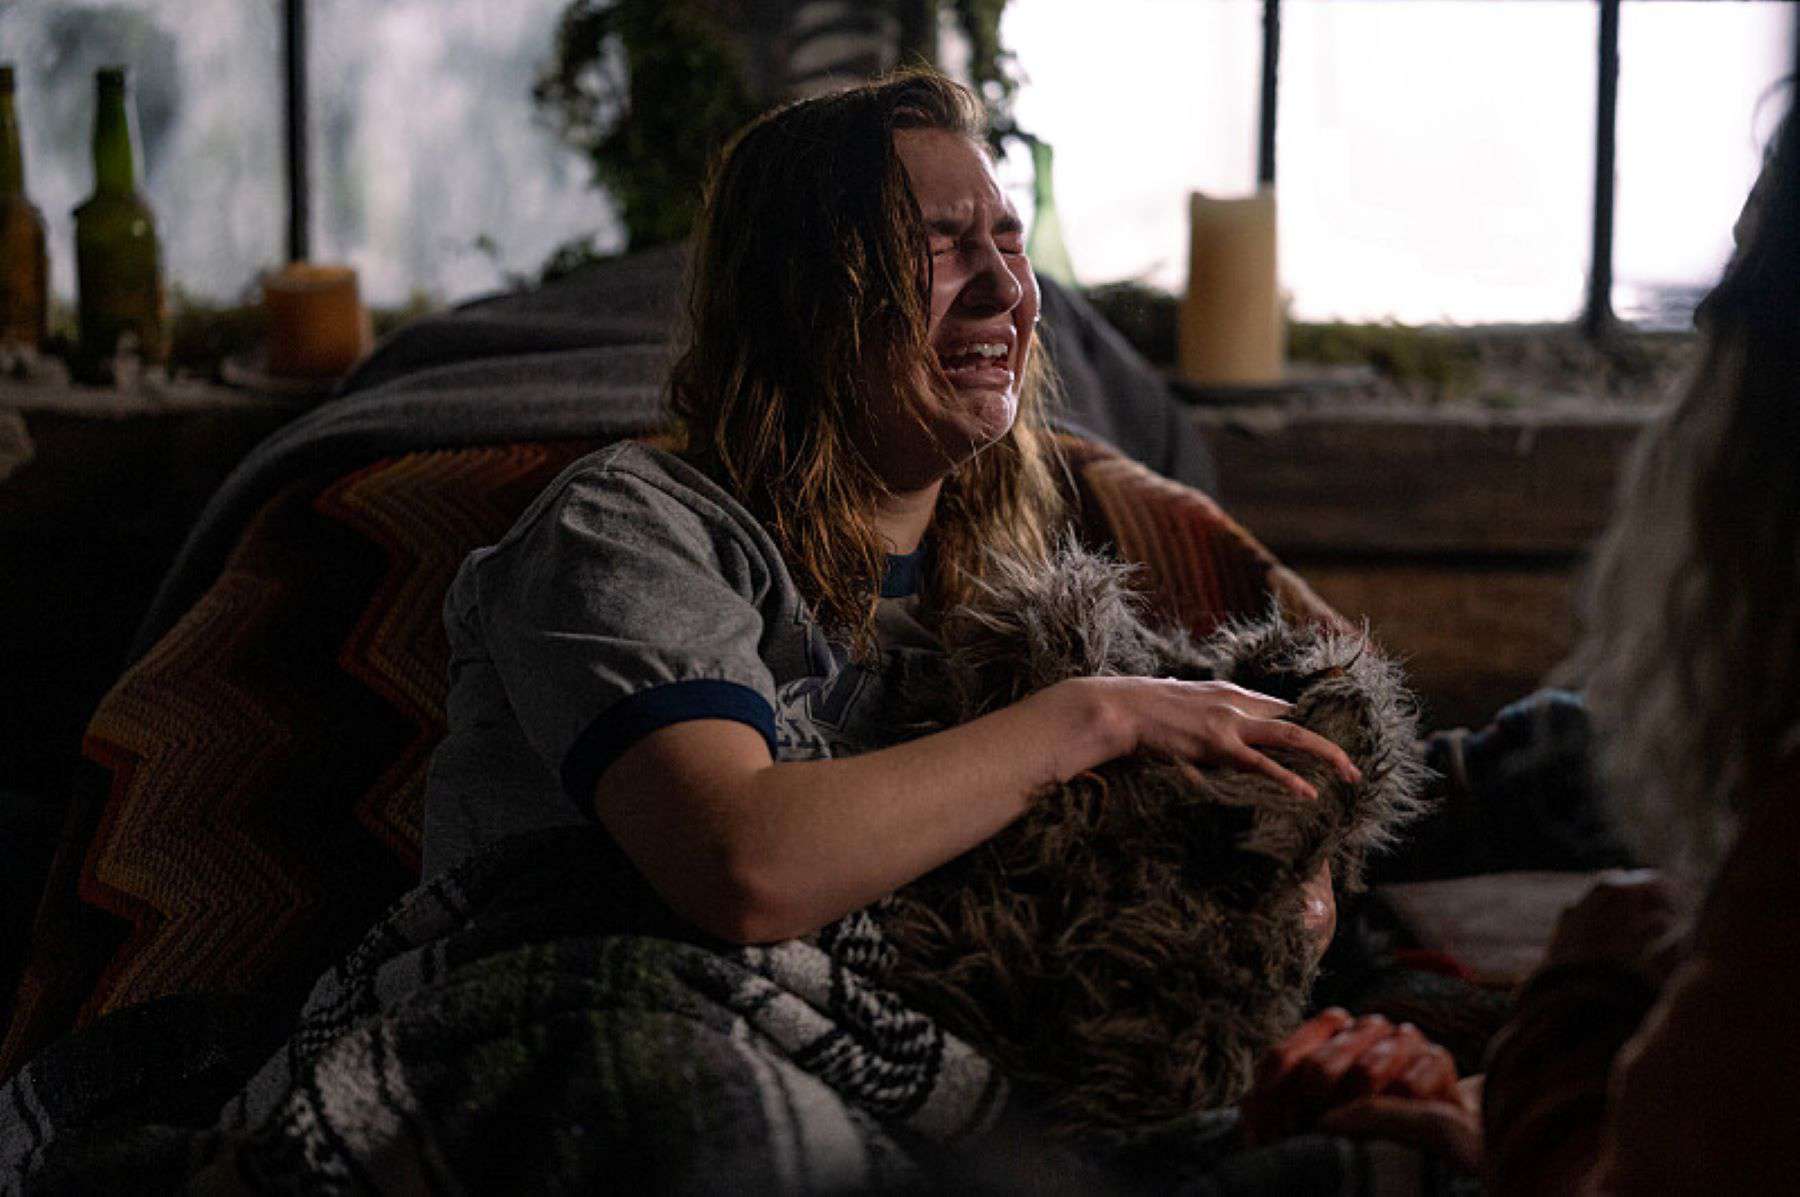 A crying girl holds a bundle in her arms in this photo by Showtime.